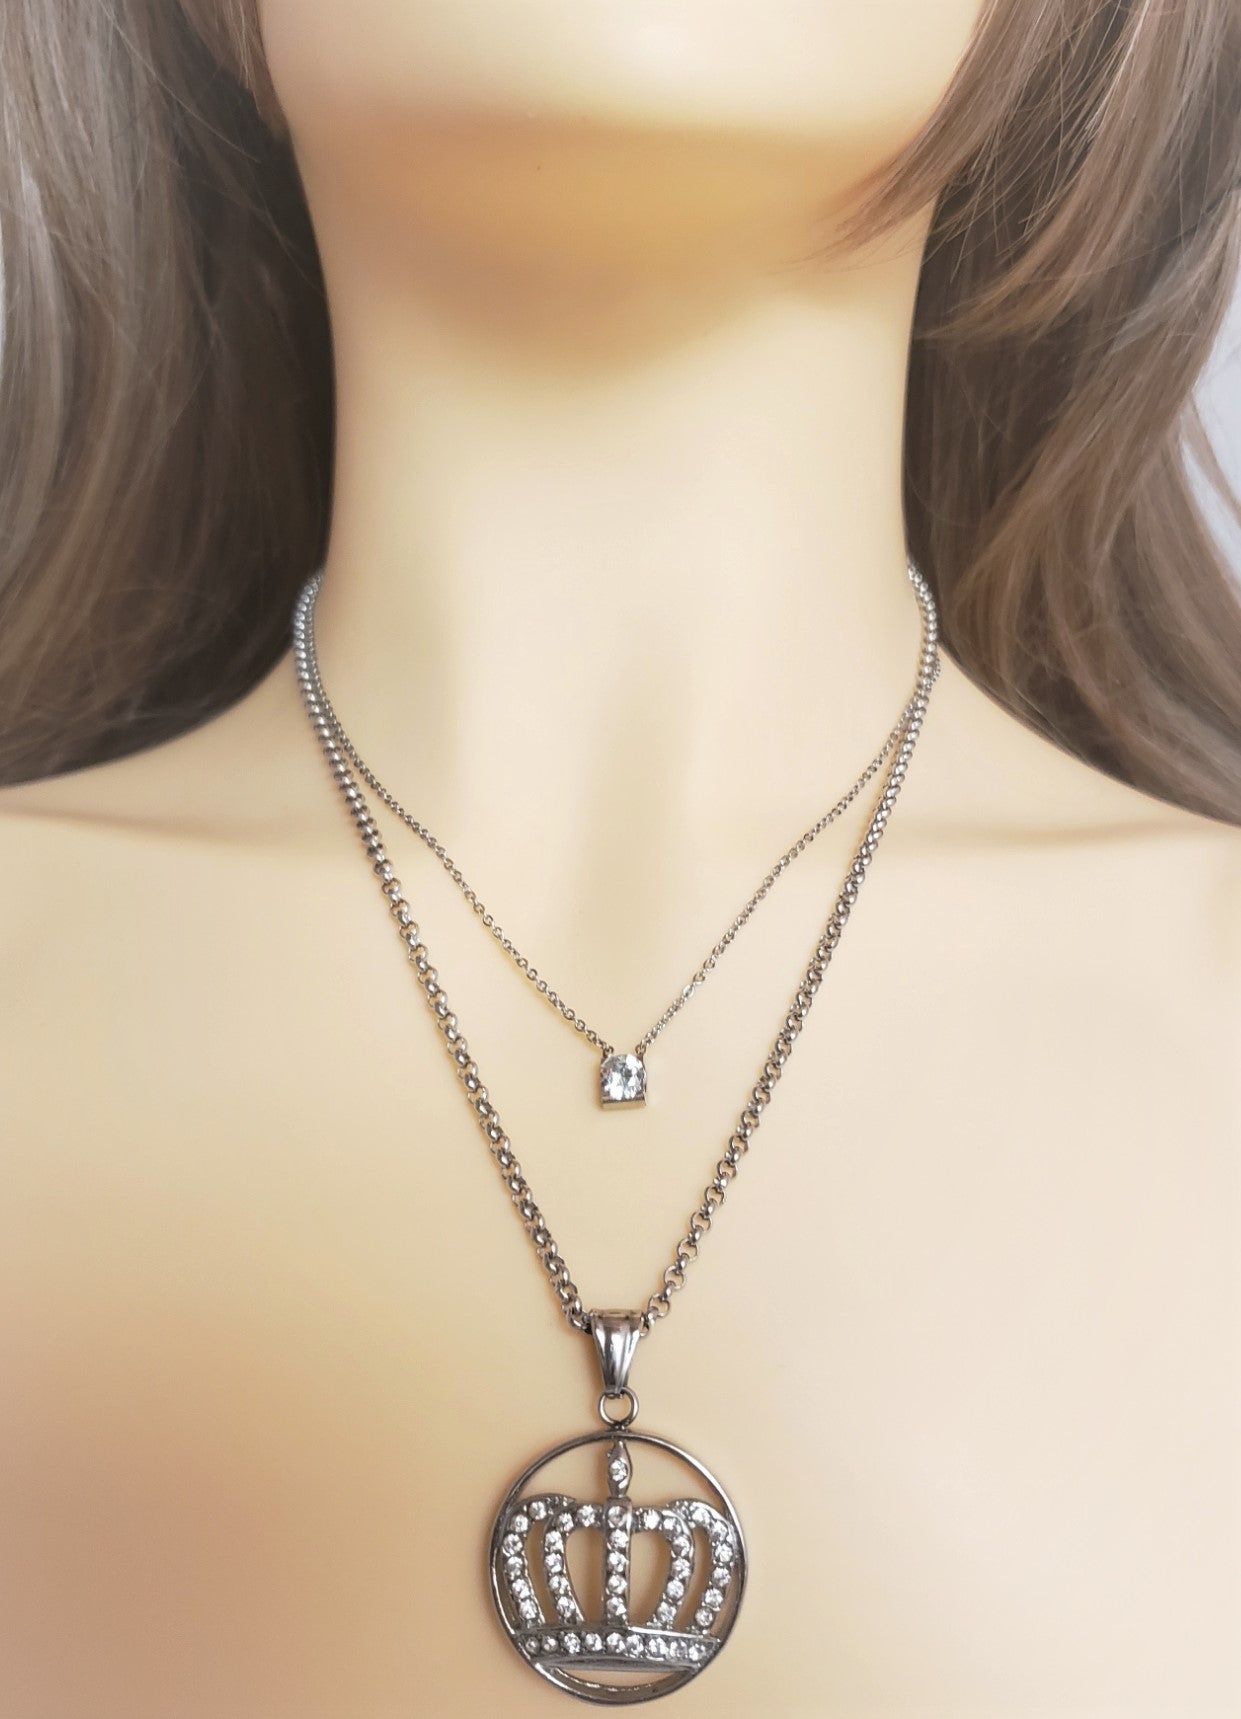 Short double necklace - SN091